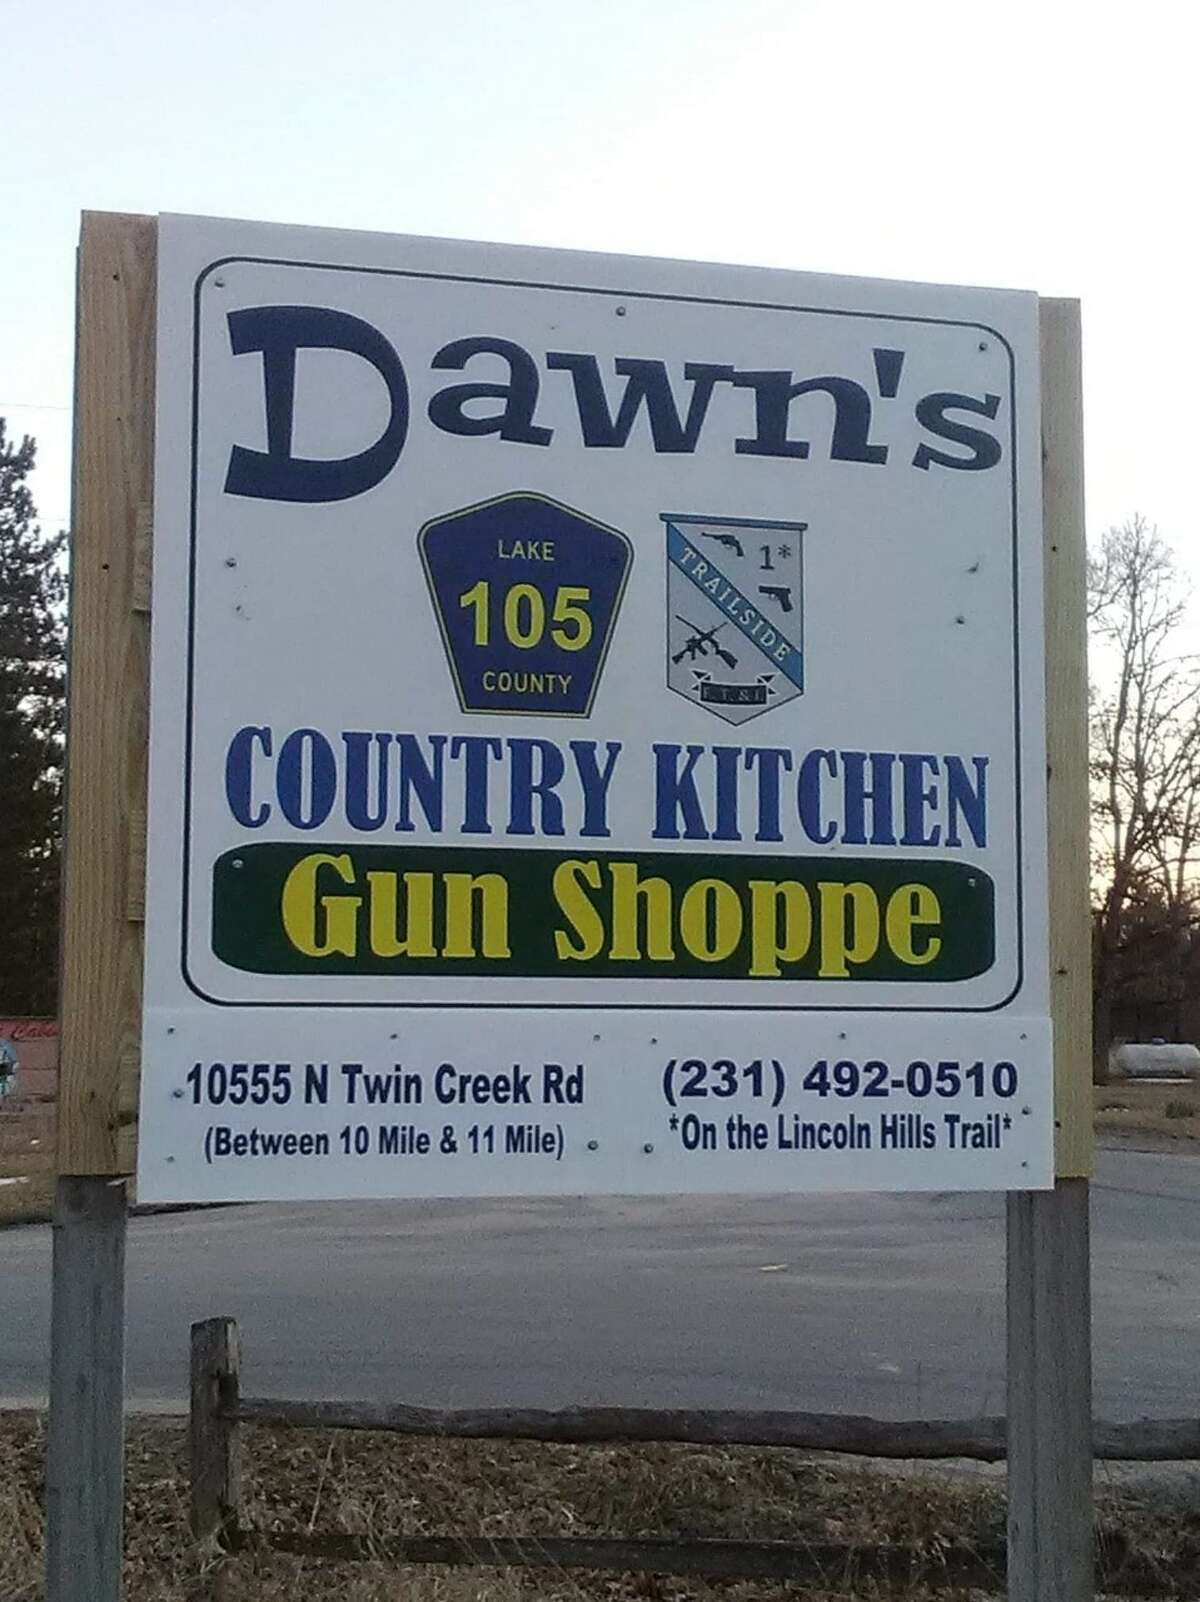 Dawn's Country Kitchen in the Luther/Irons area has been serving the area for more than a decade, drawing visitors from all over. The business has been sold and the new owner will be reopening in late March.